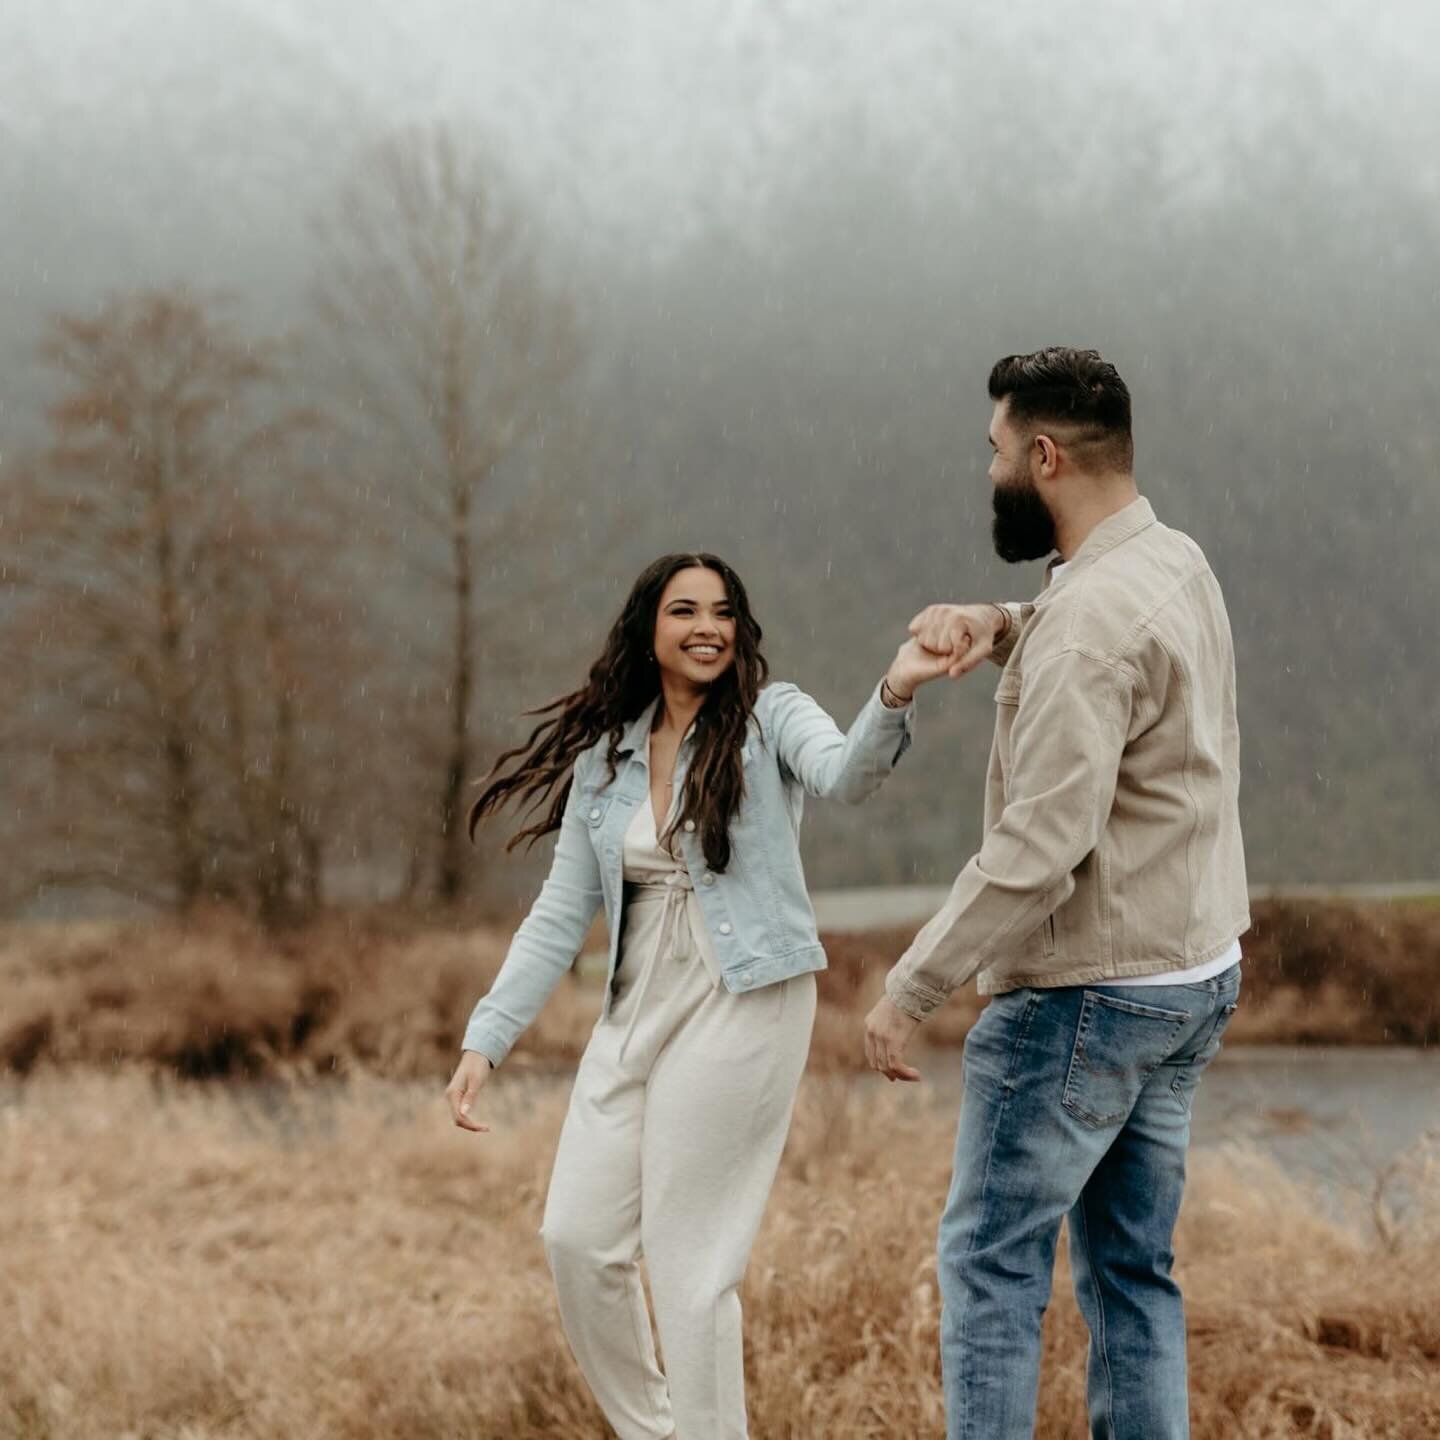 Hand in hand, they danced through rain and hail, the cold wind only drawing them closer as they kept each other warm.

#vancouverweddingphotographer #vancouverengagement #vancouverphotographer #vancouverwedding #engagementphotoshoot #pittmeadowsphoto